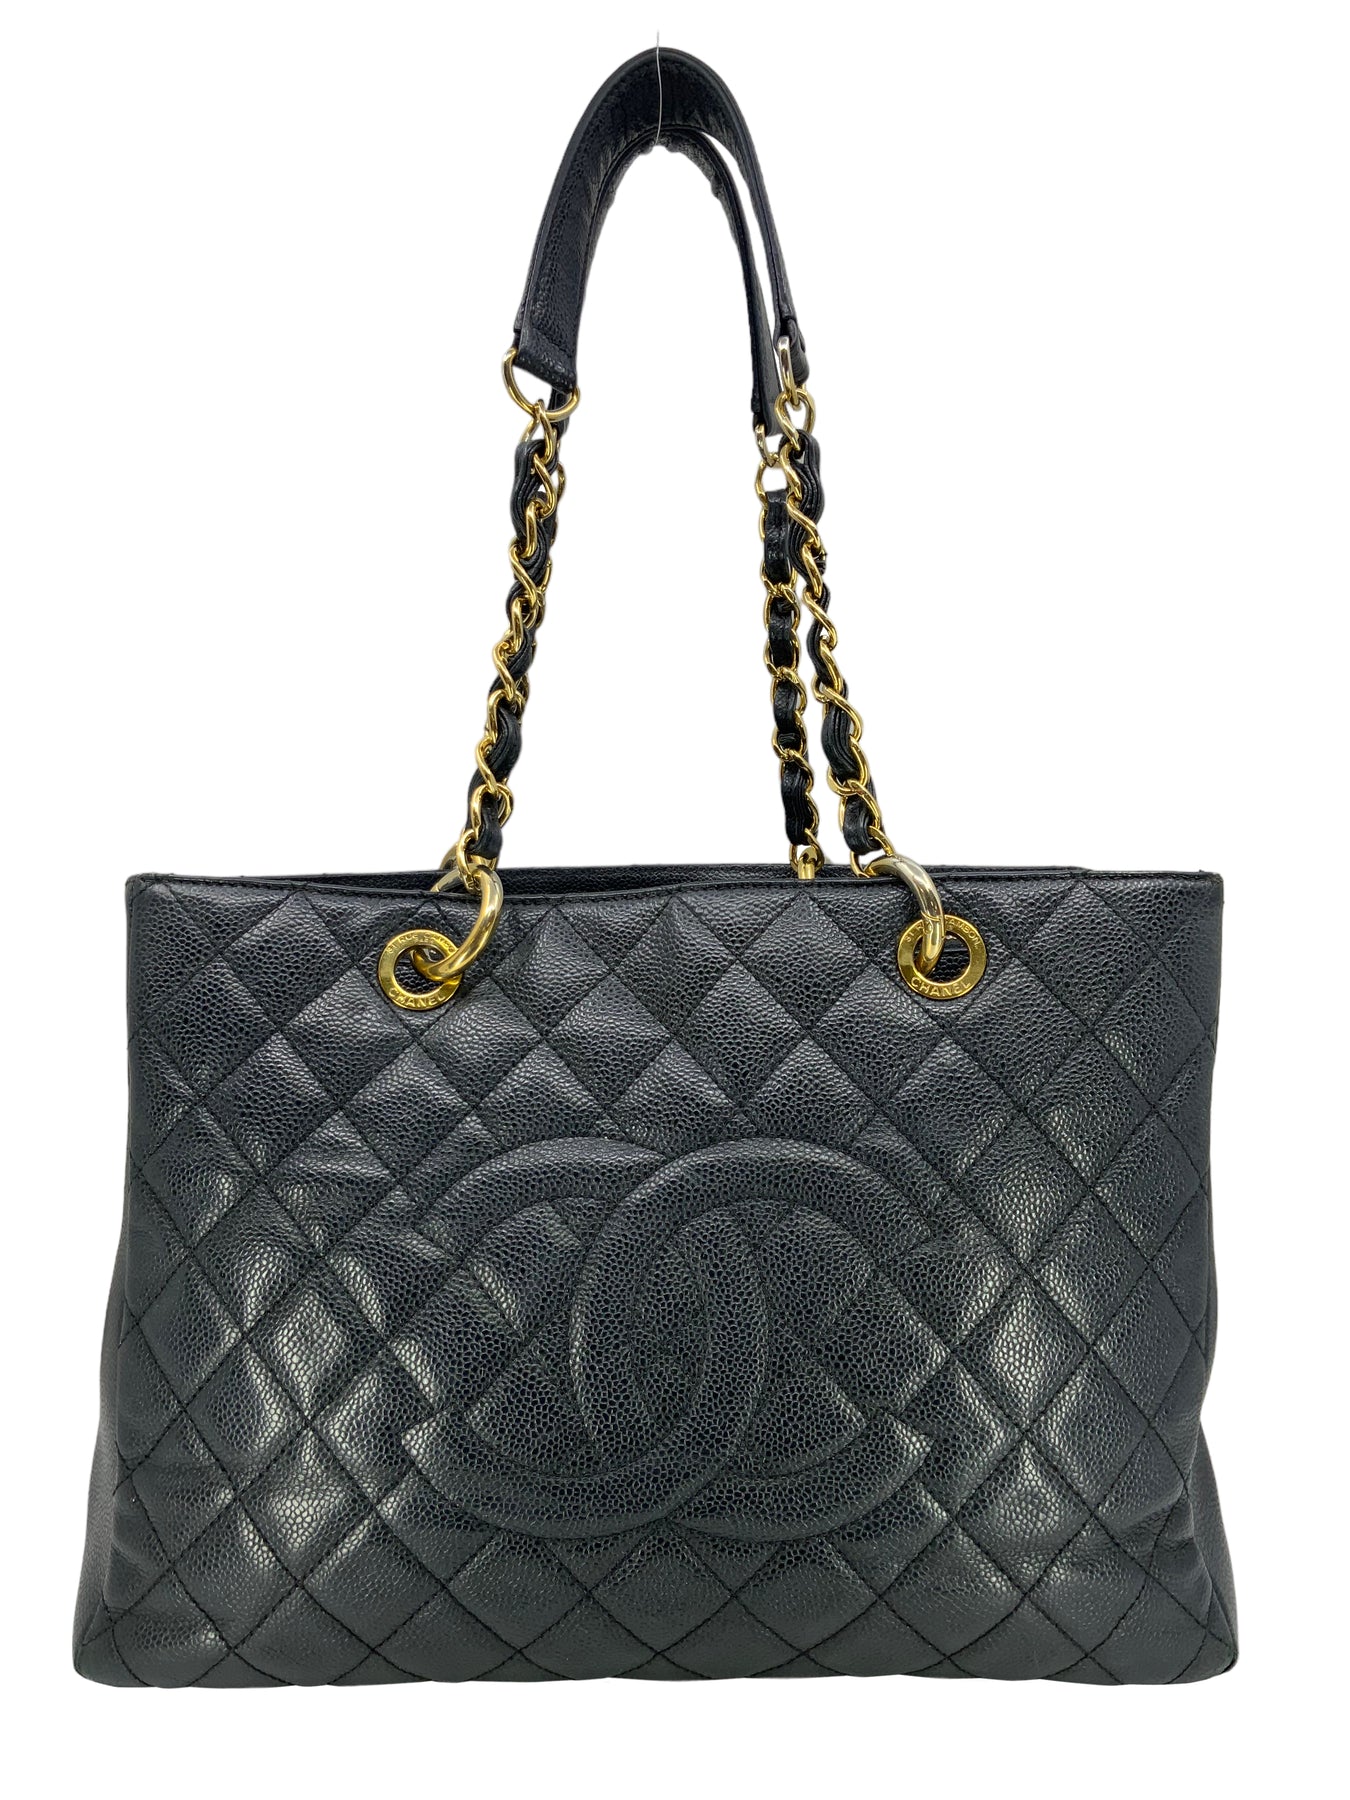 Chanel - CC Medallion Black Diamond Quilted Caviar Leather Tote / Shoulder Bag